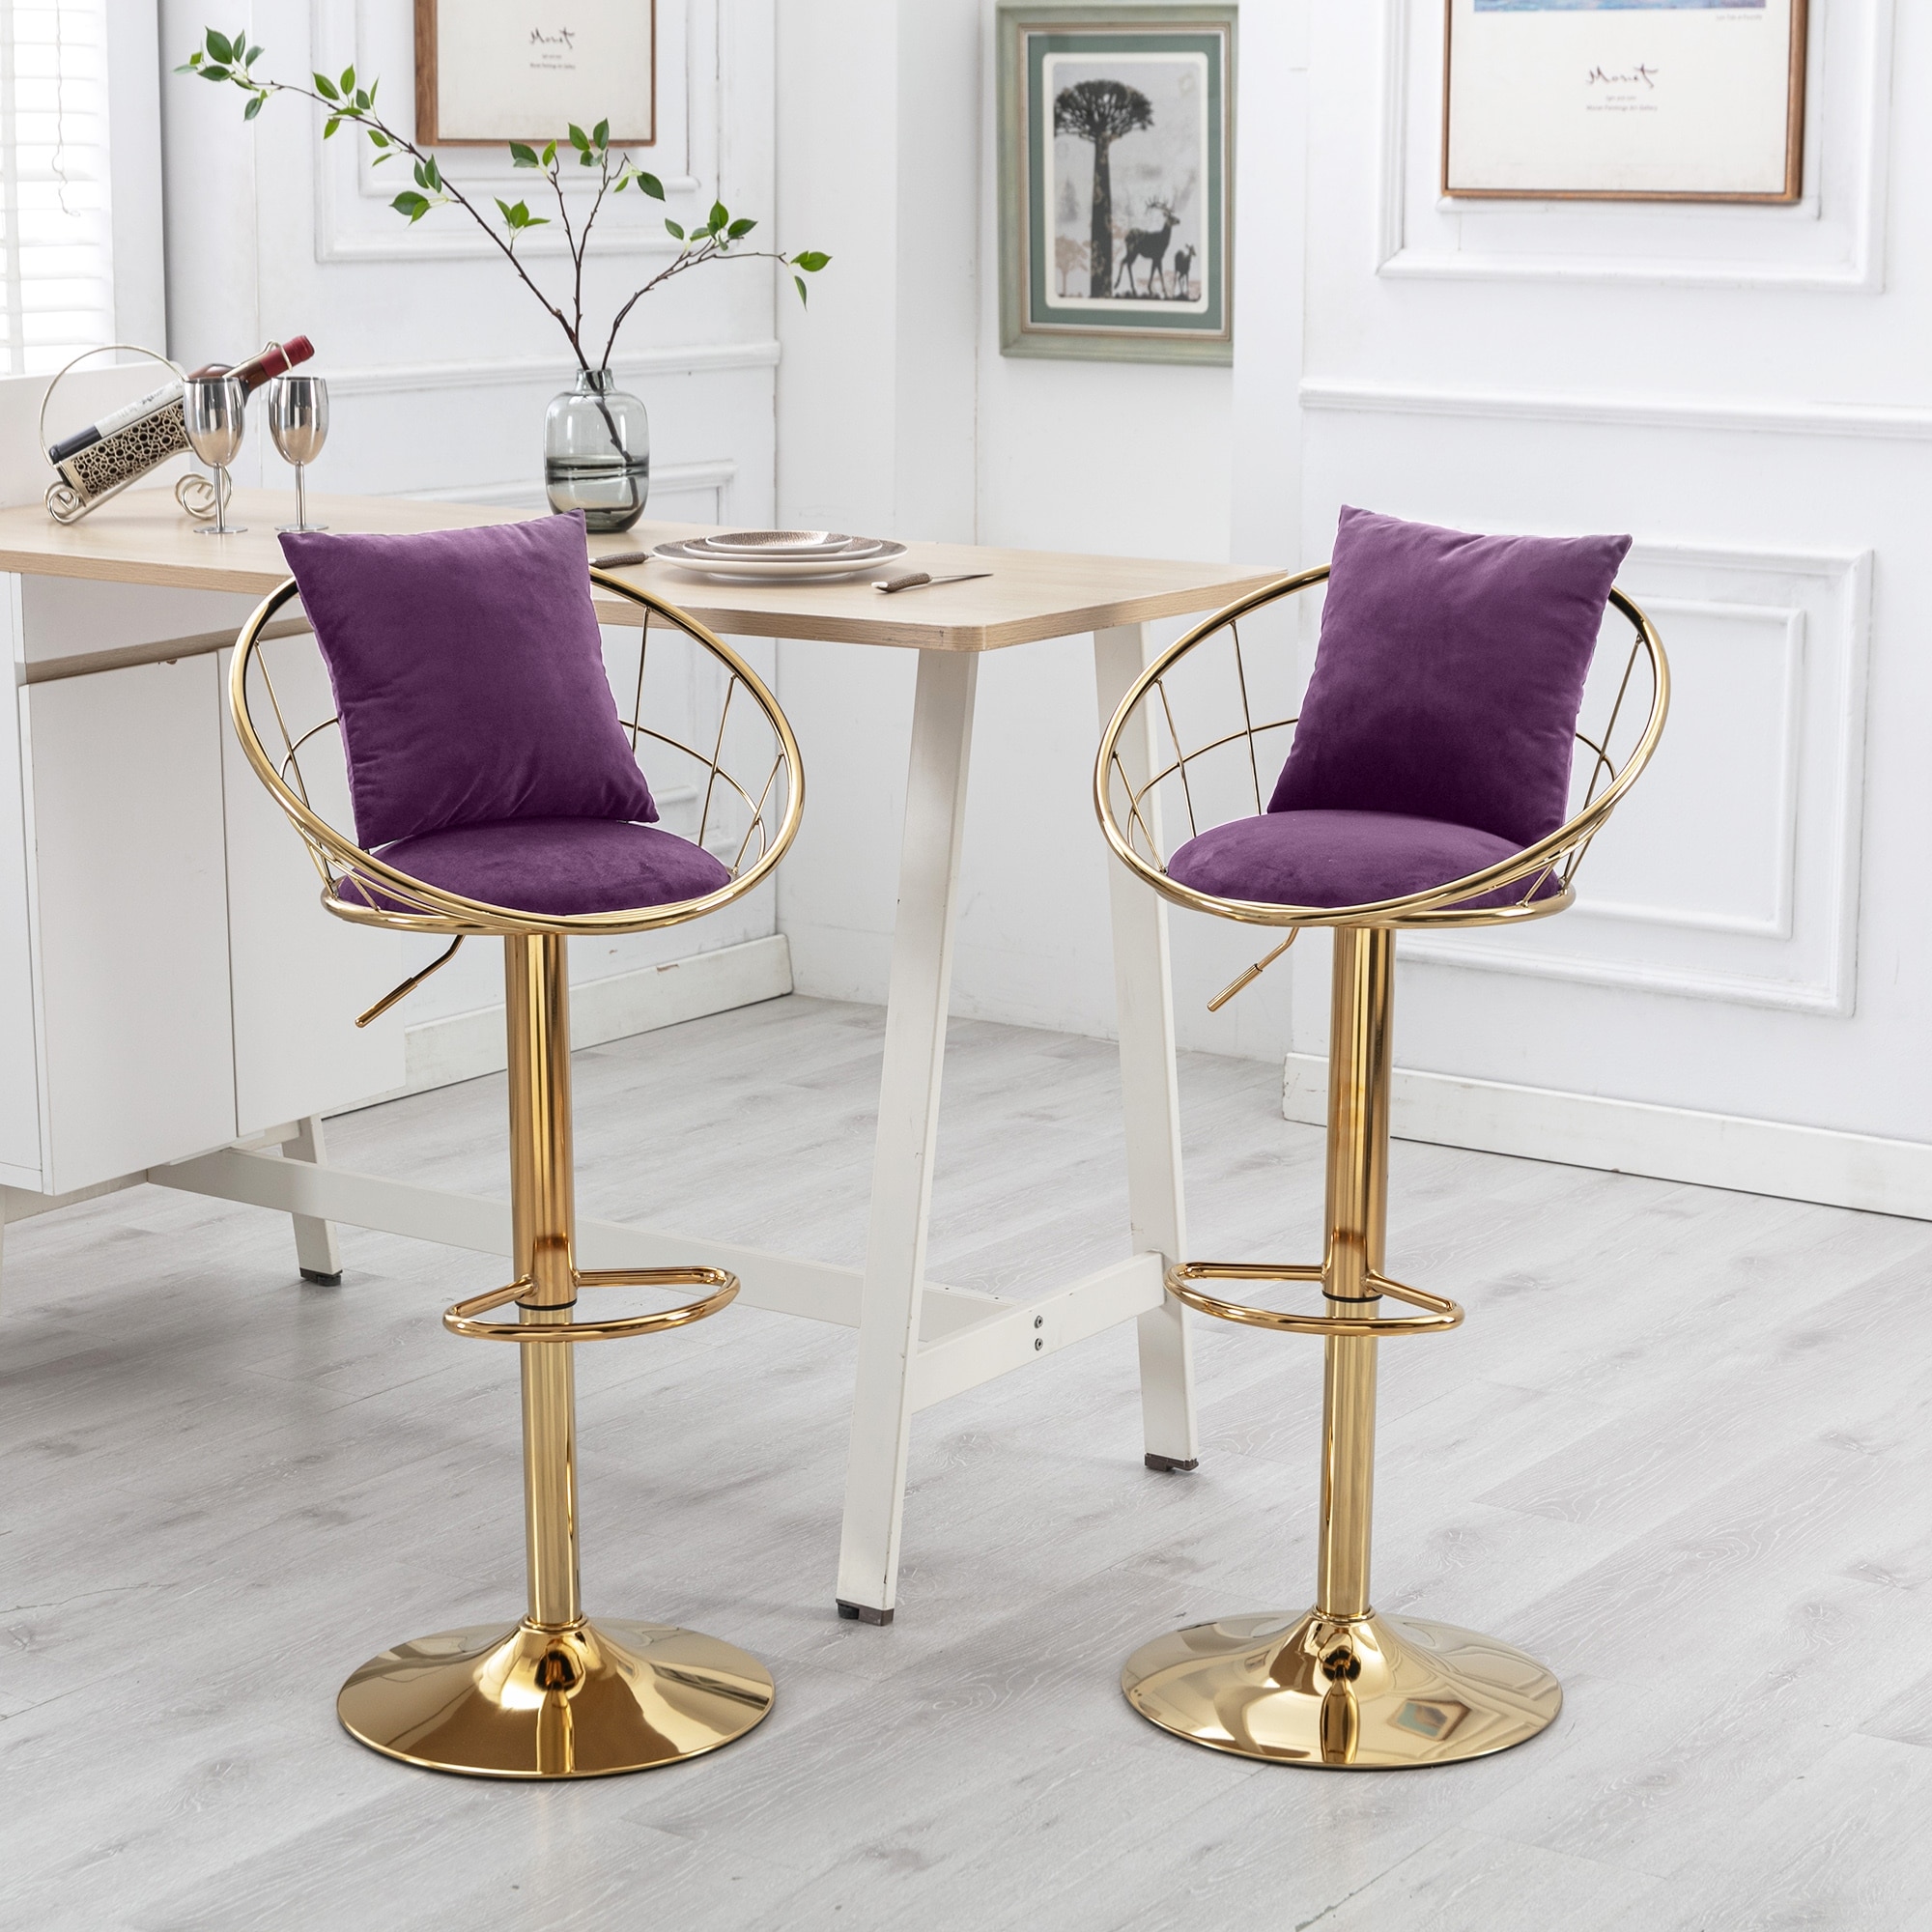 phoebecat 2Pcs Velvet Upholstered Bar Chairs with Gold Plated Metal Chair Foot